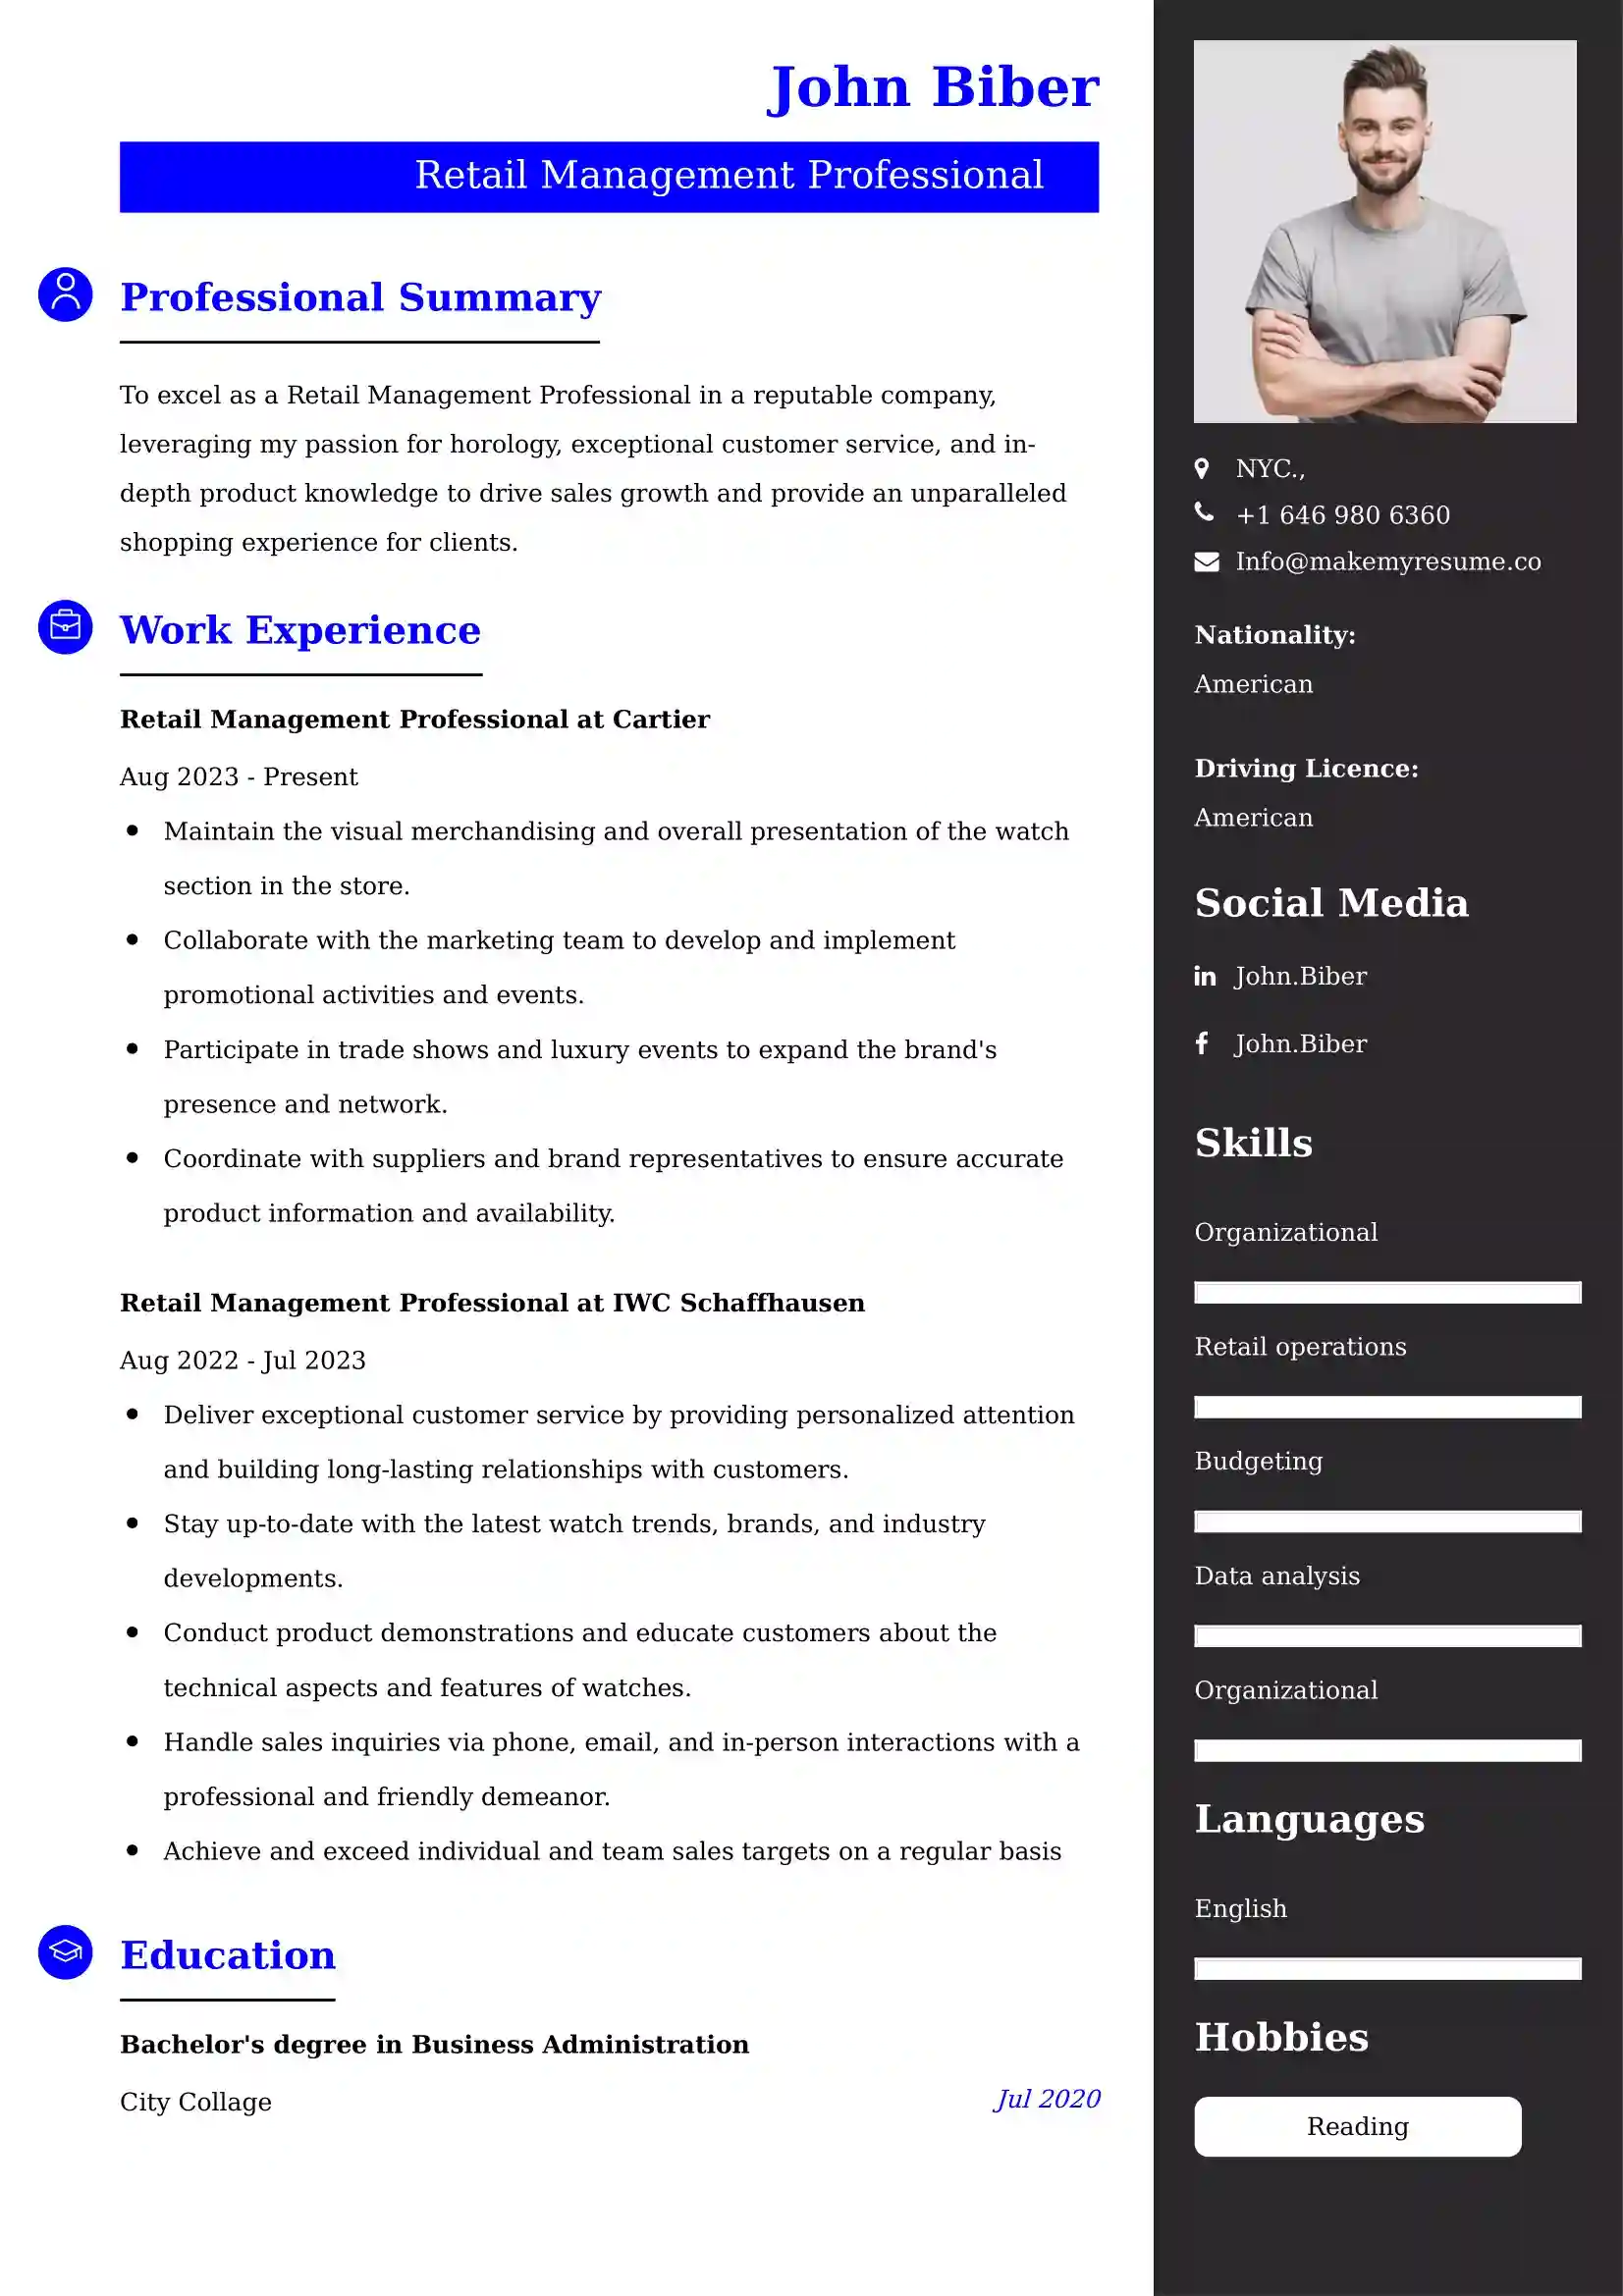 Retail Management Professional Resume Examples - UAE Format and Tips.